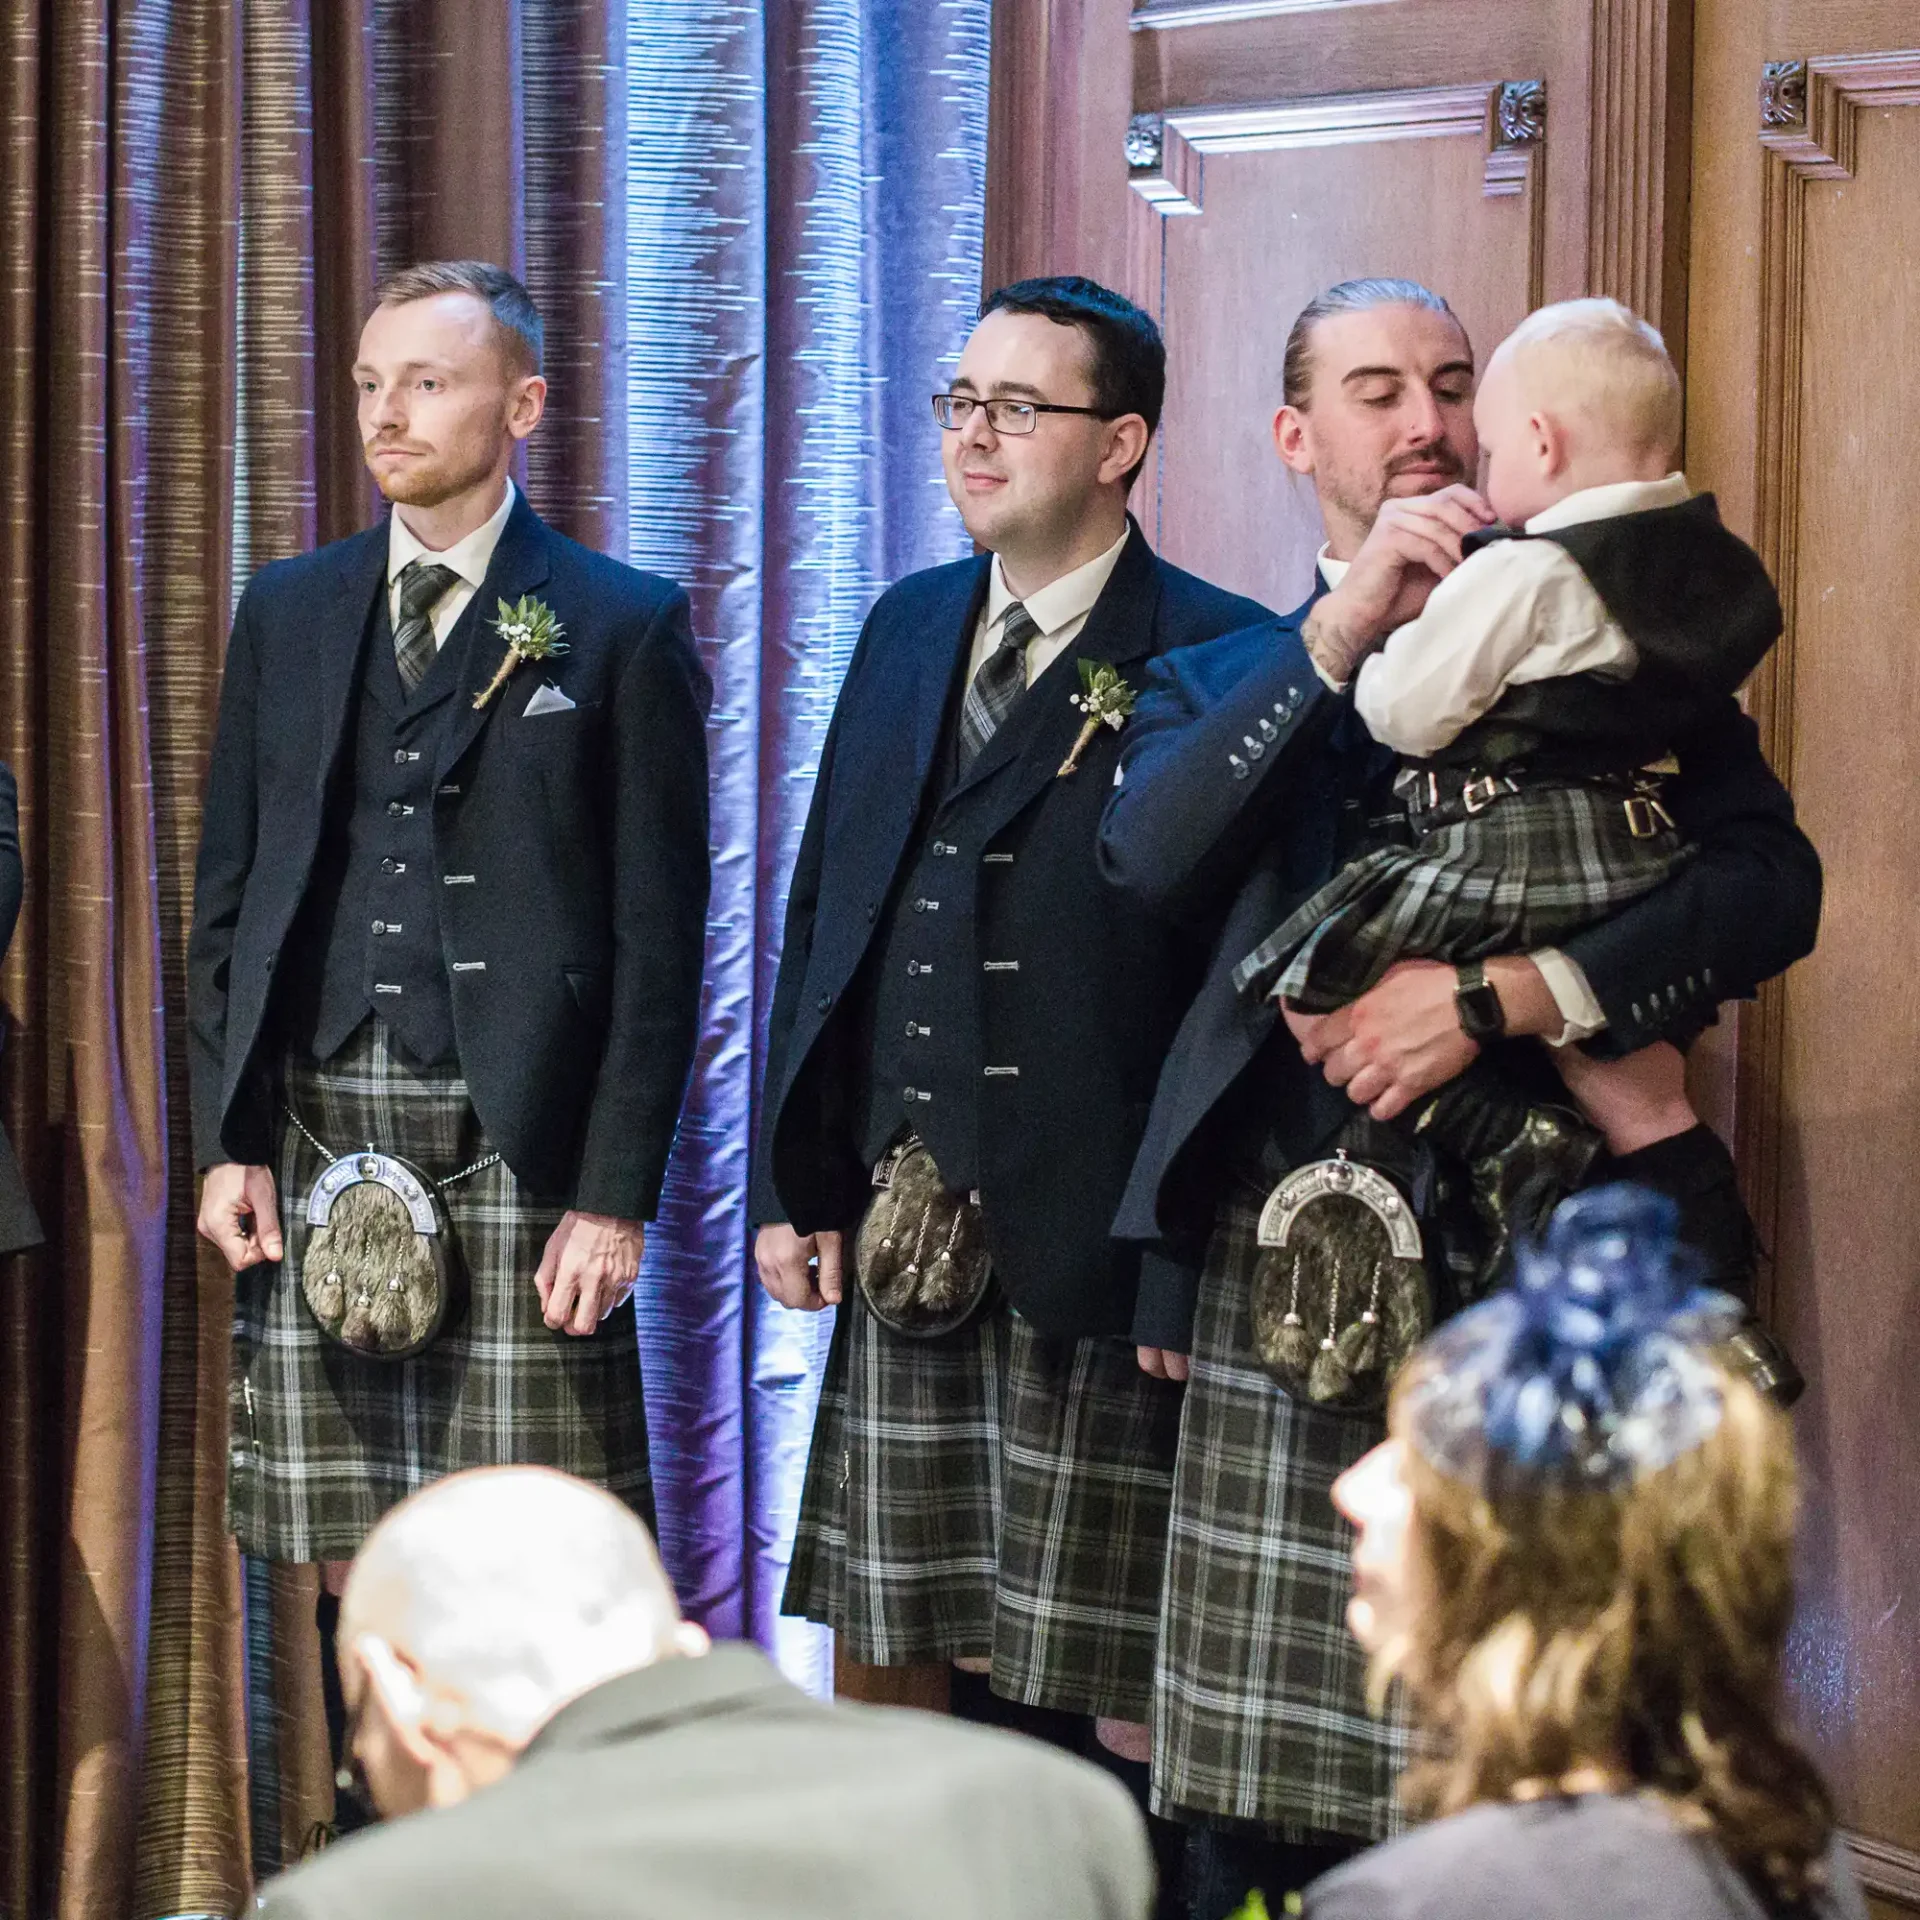 Three men in traditional scottish kilts at a formal event, one holding a baby, standing indoors with spectators in the background.